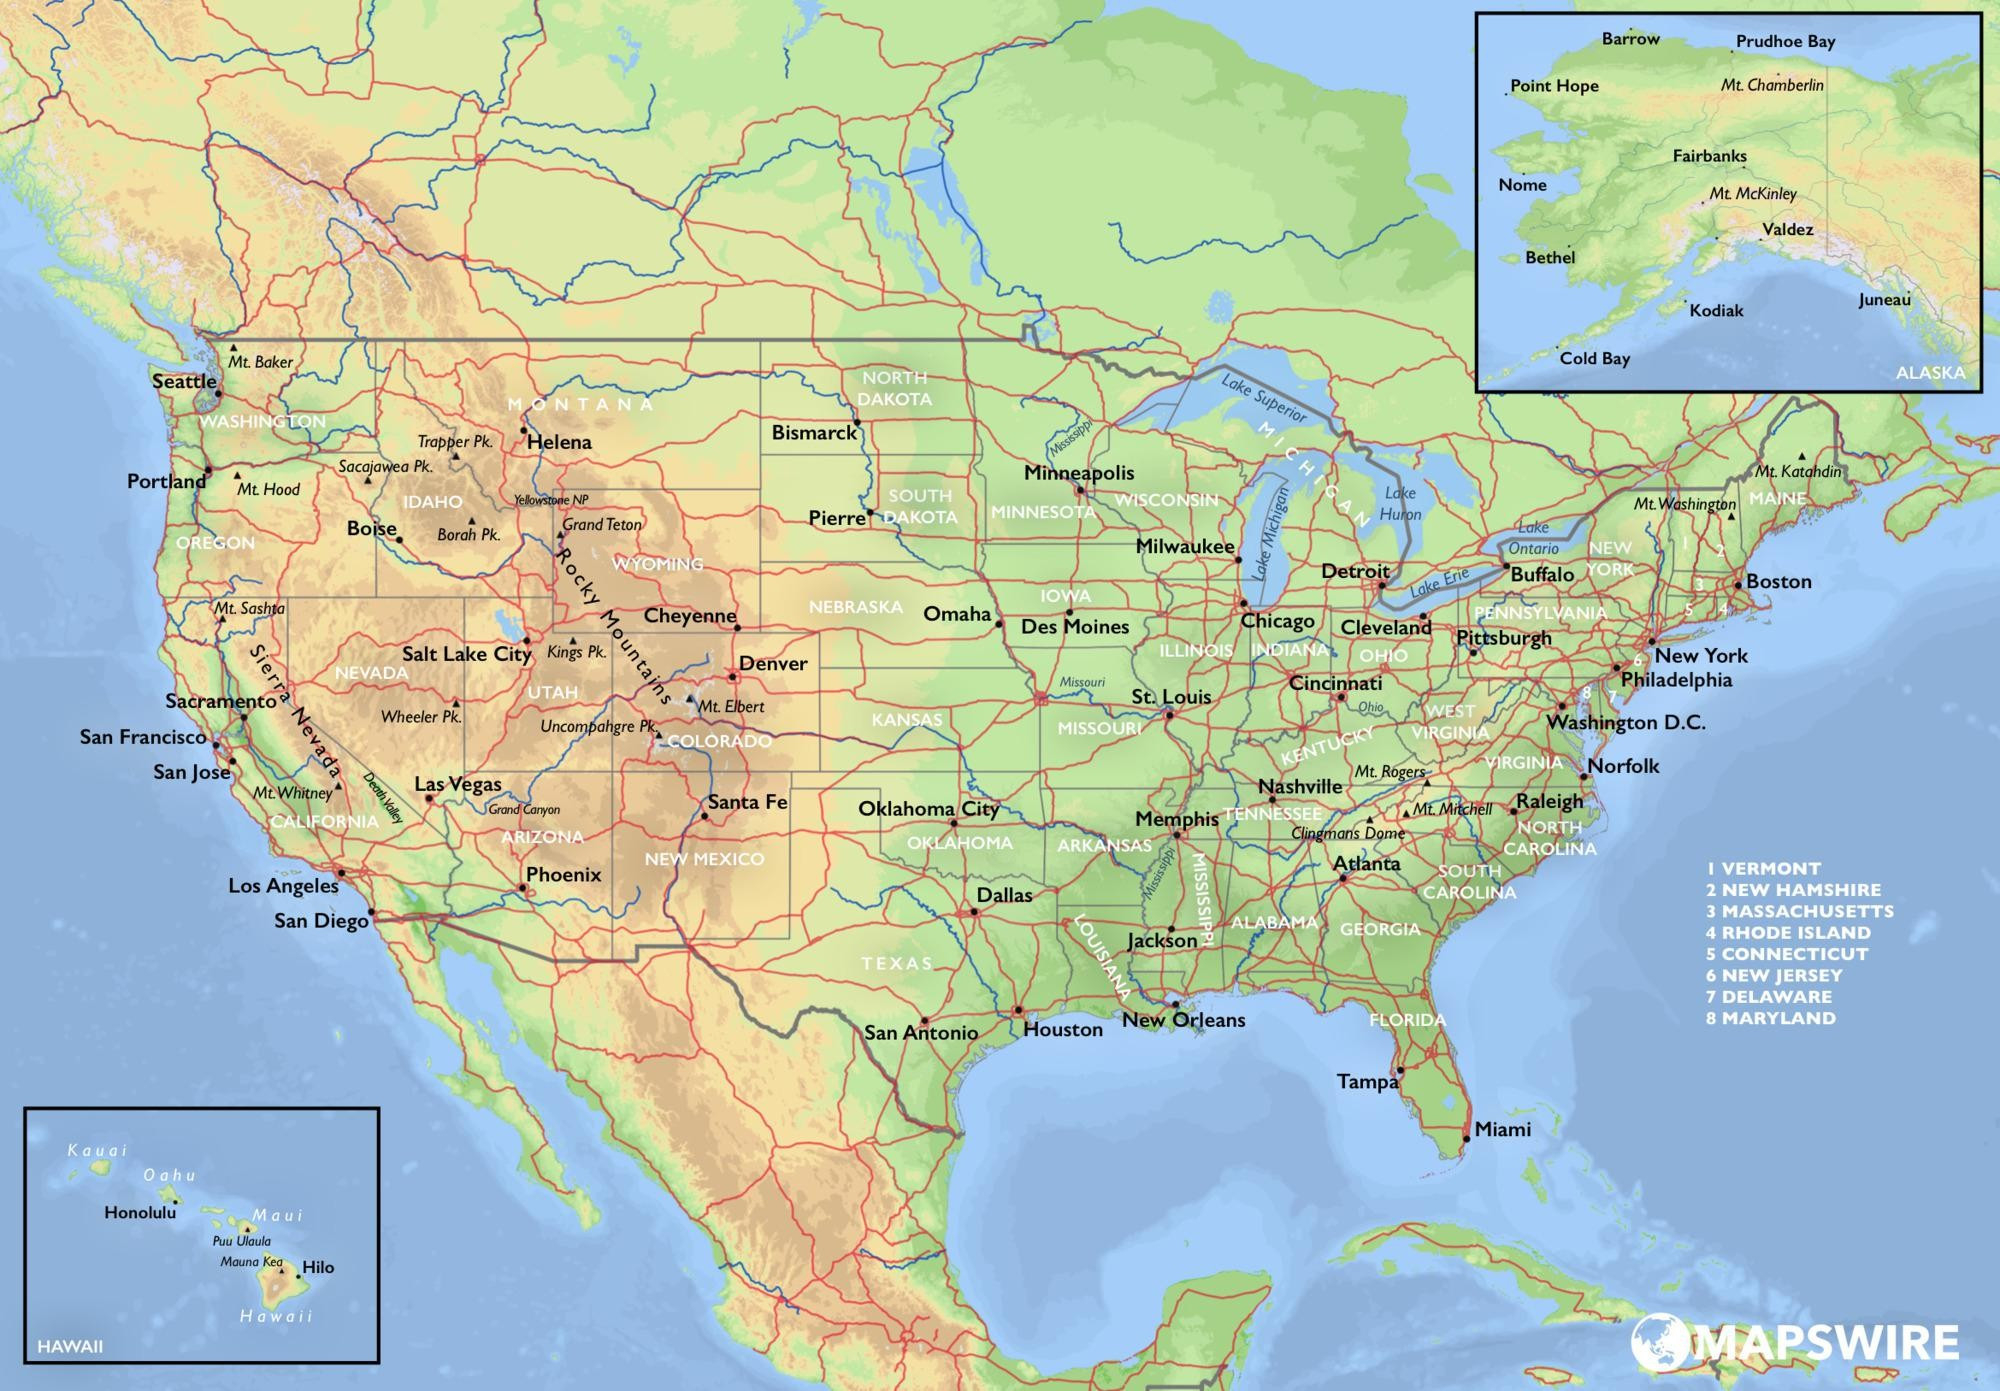 Printable Us Topographic Maps Archives - Passportstatus.co Awesome - Printable Topographic Map Of The United States